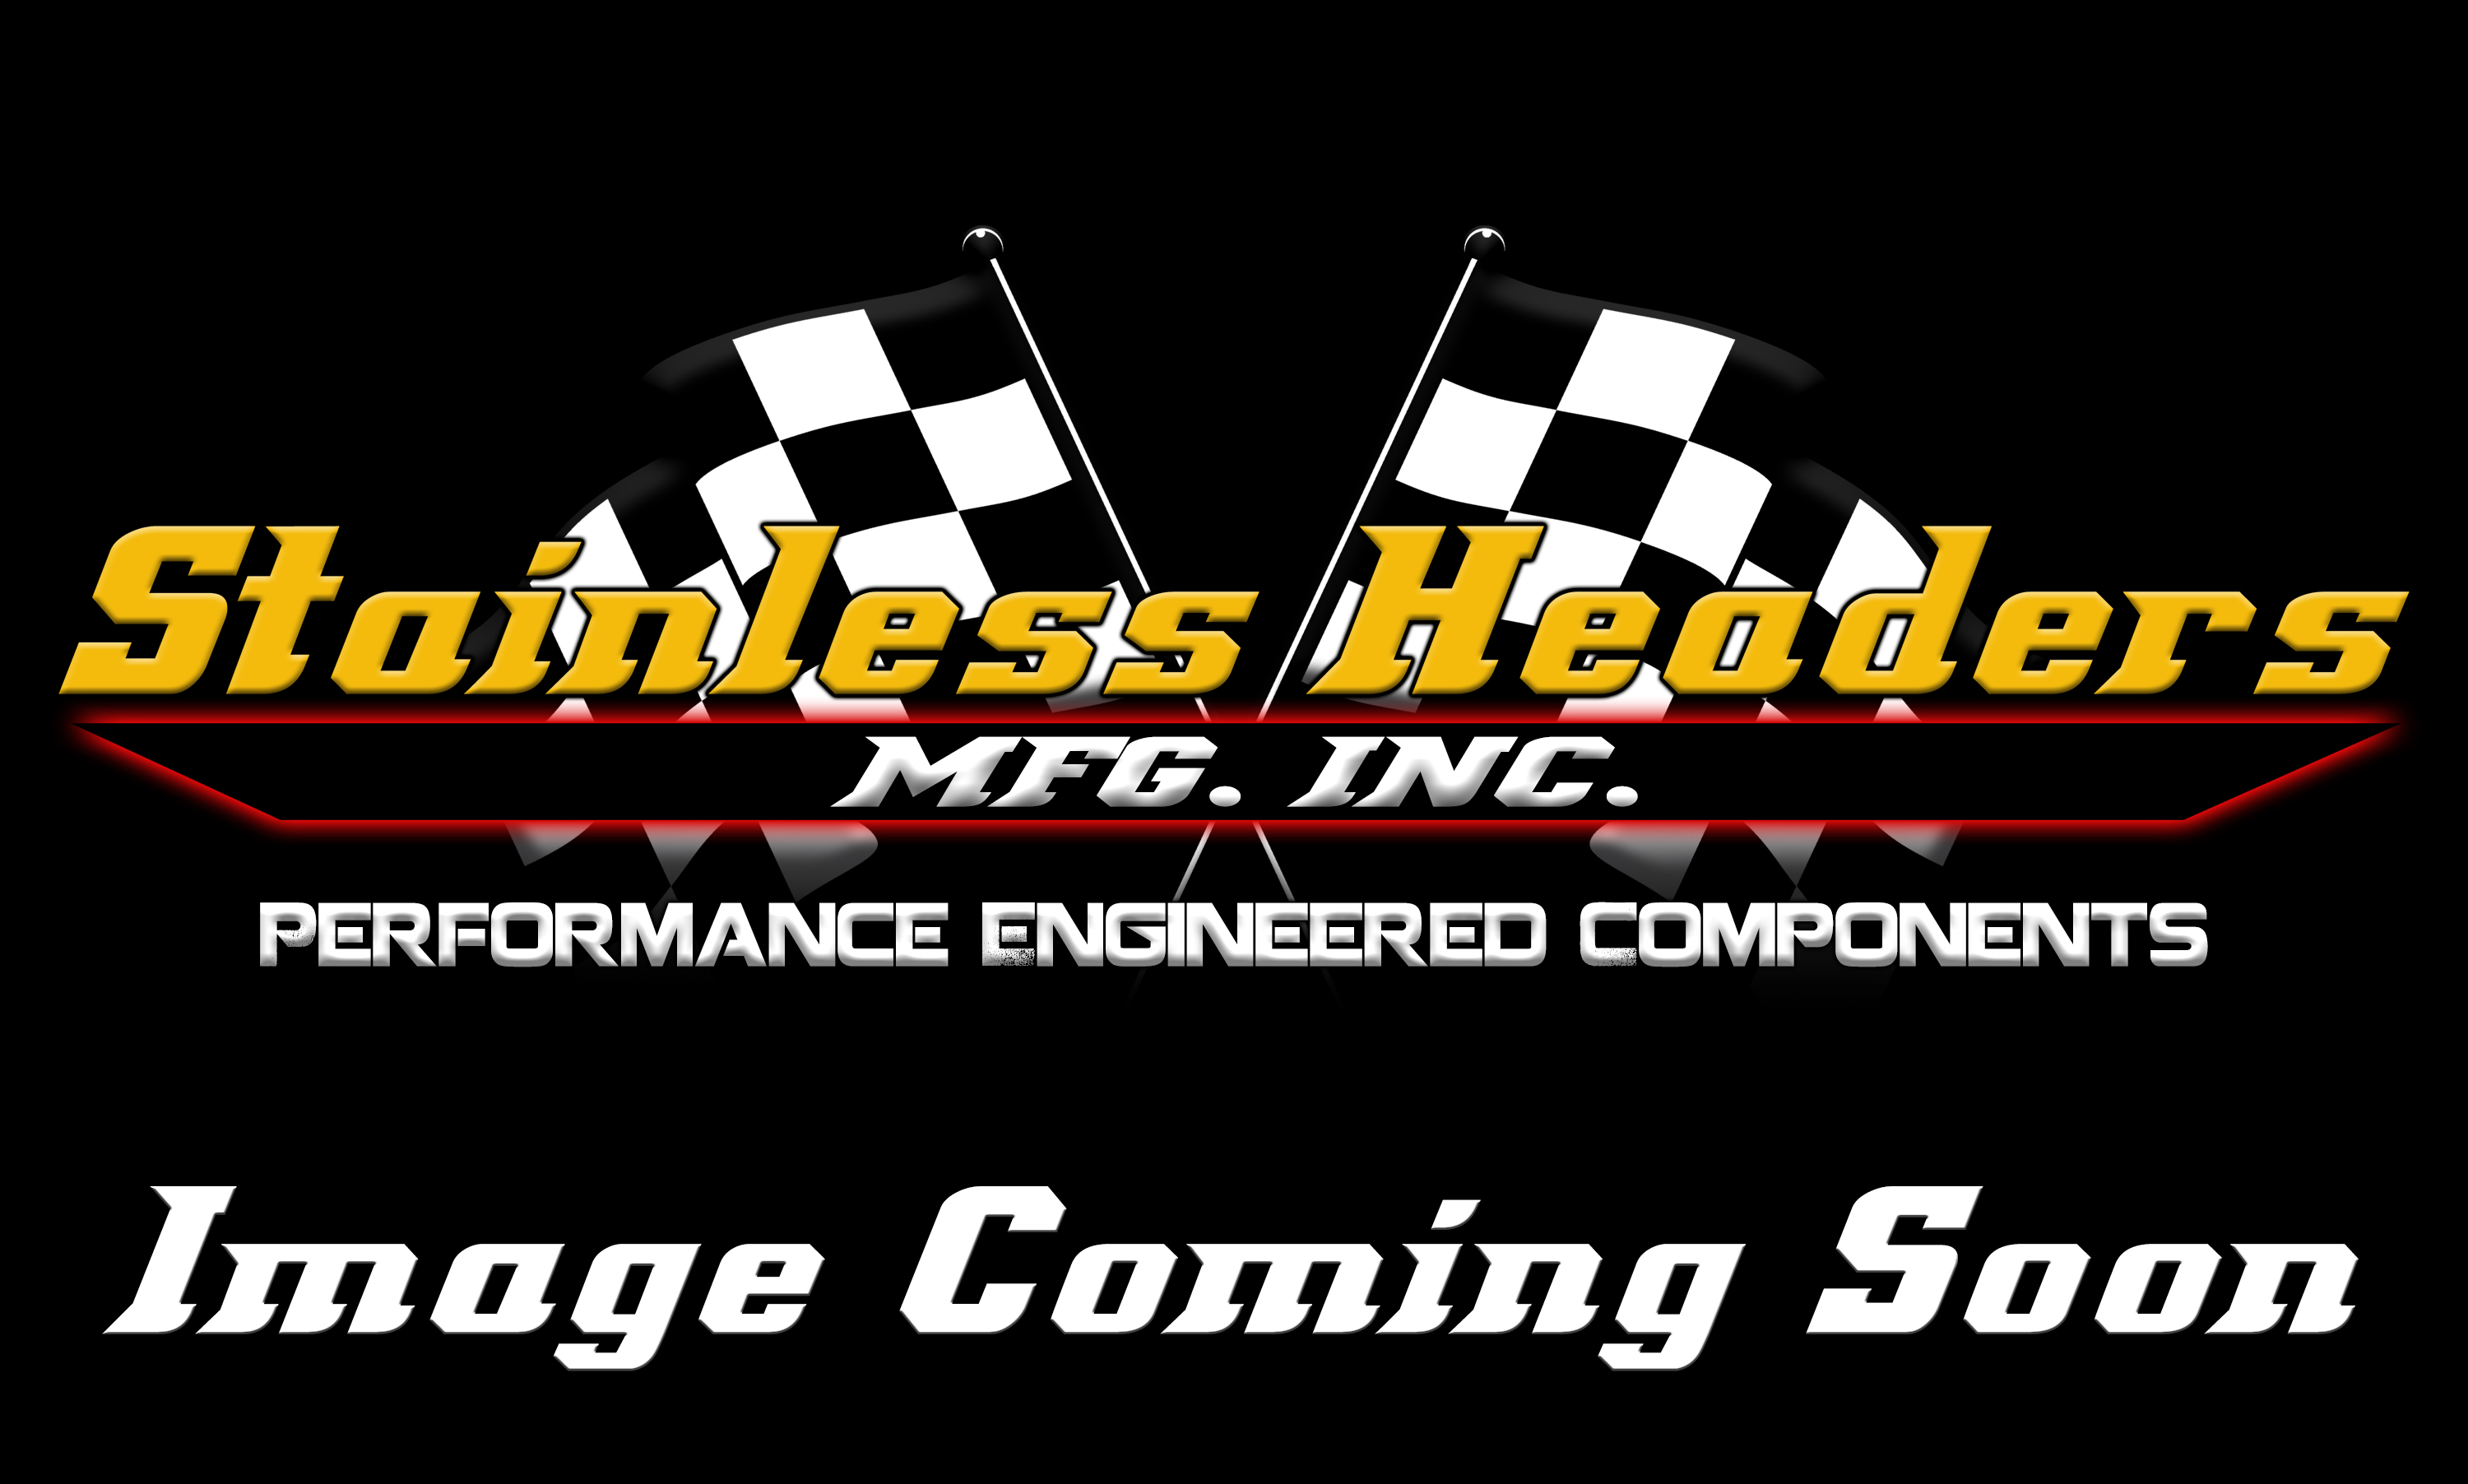 CompTurbo Technology Turbochargers - Comp Turbo Journal Bearing Turbochargers - CompTurbo Technologies - CTR3281S-6062 360 Journal Bearing Turbocharger (750 HP)